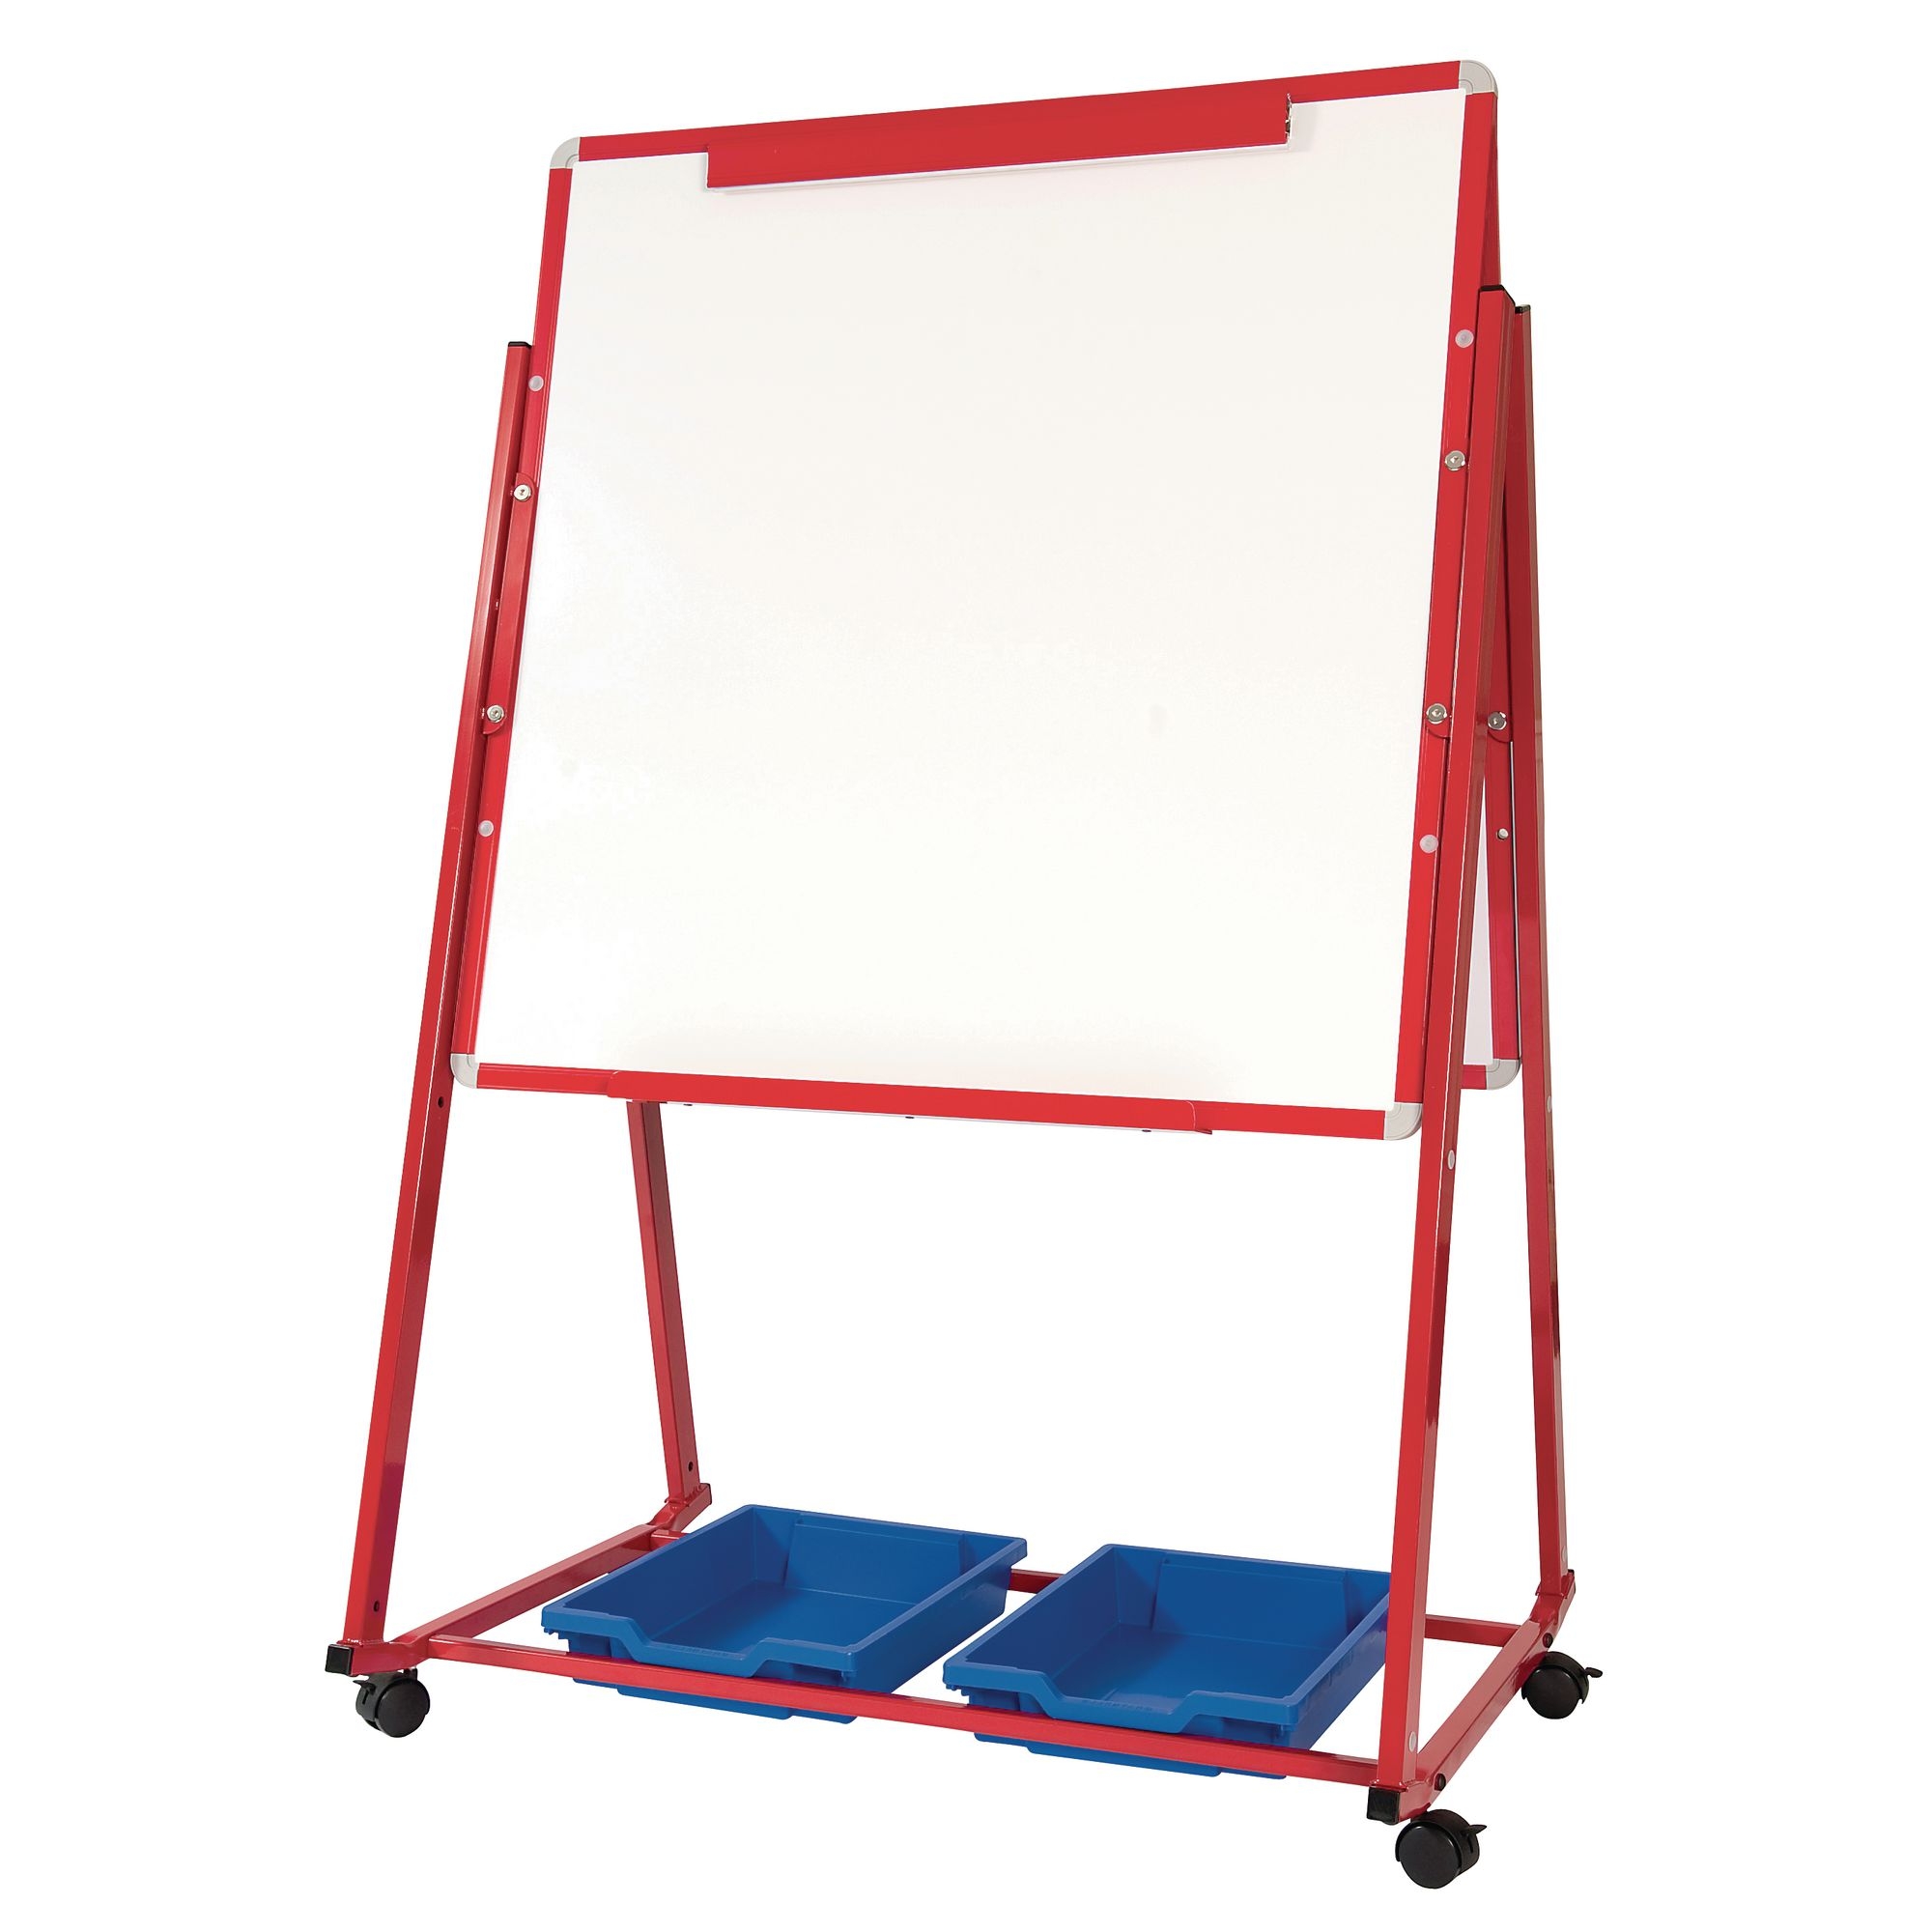 Double Sided Mobile Magnetic Display/ Storage Easel - Blue